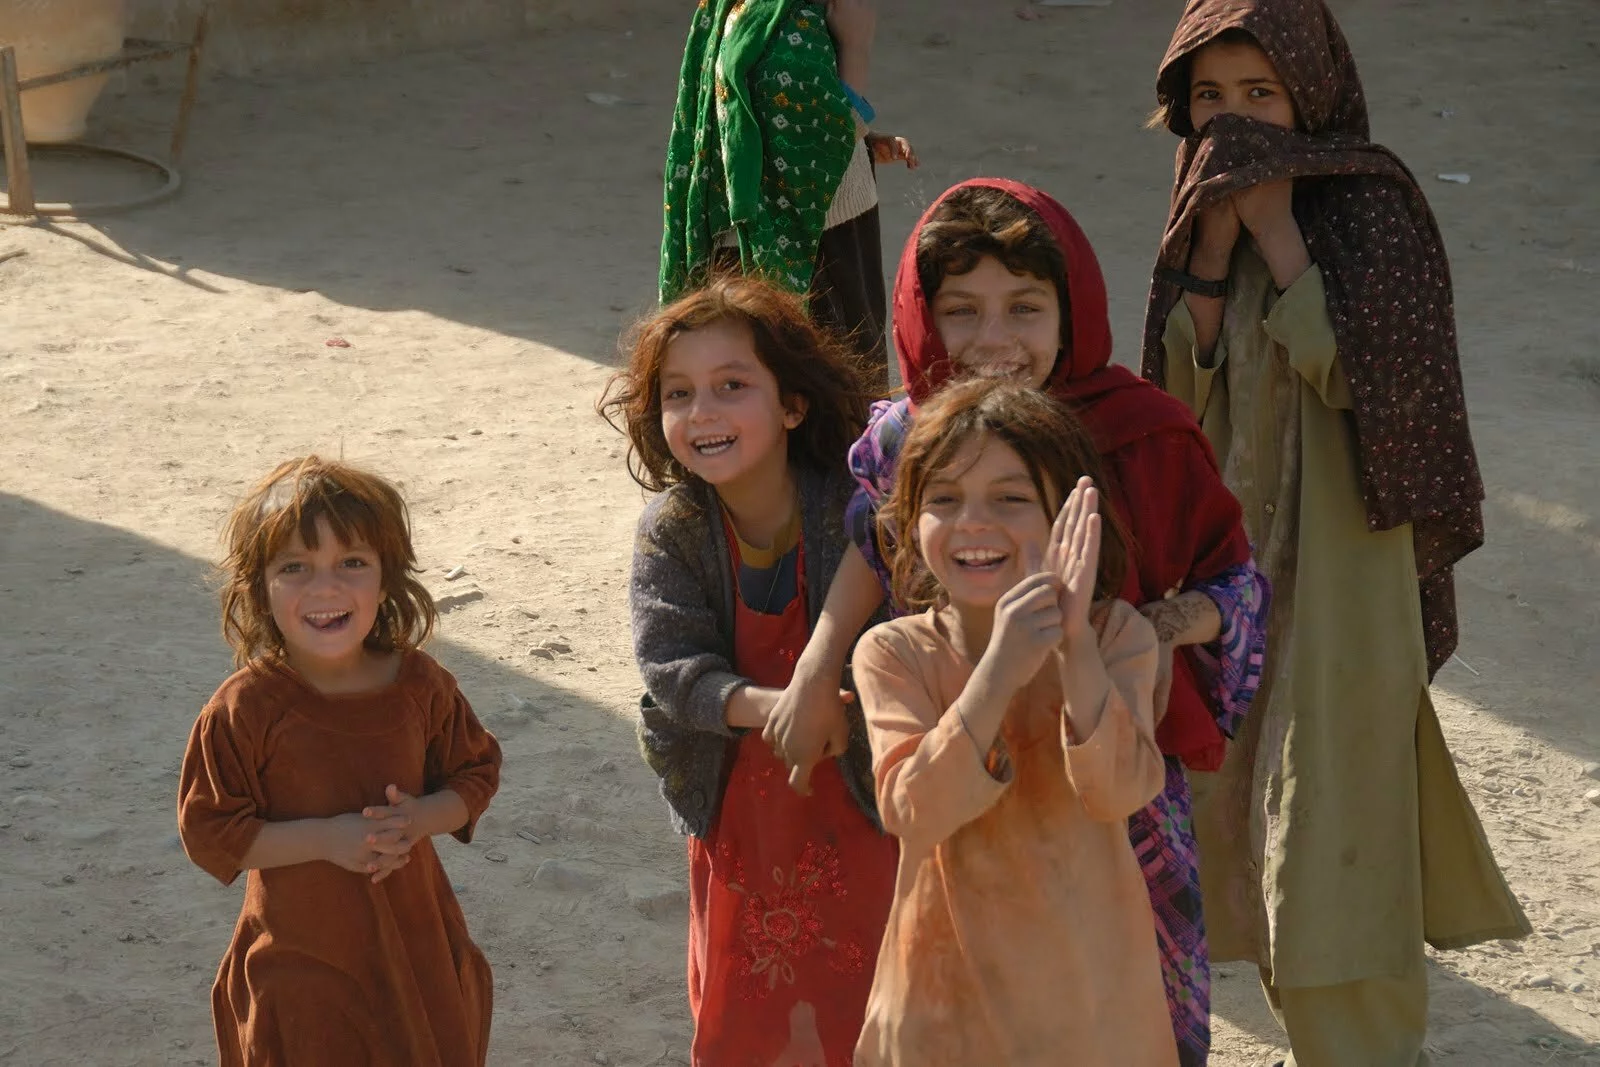 Afghan children are absolutely beautiful with smiles